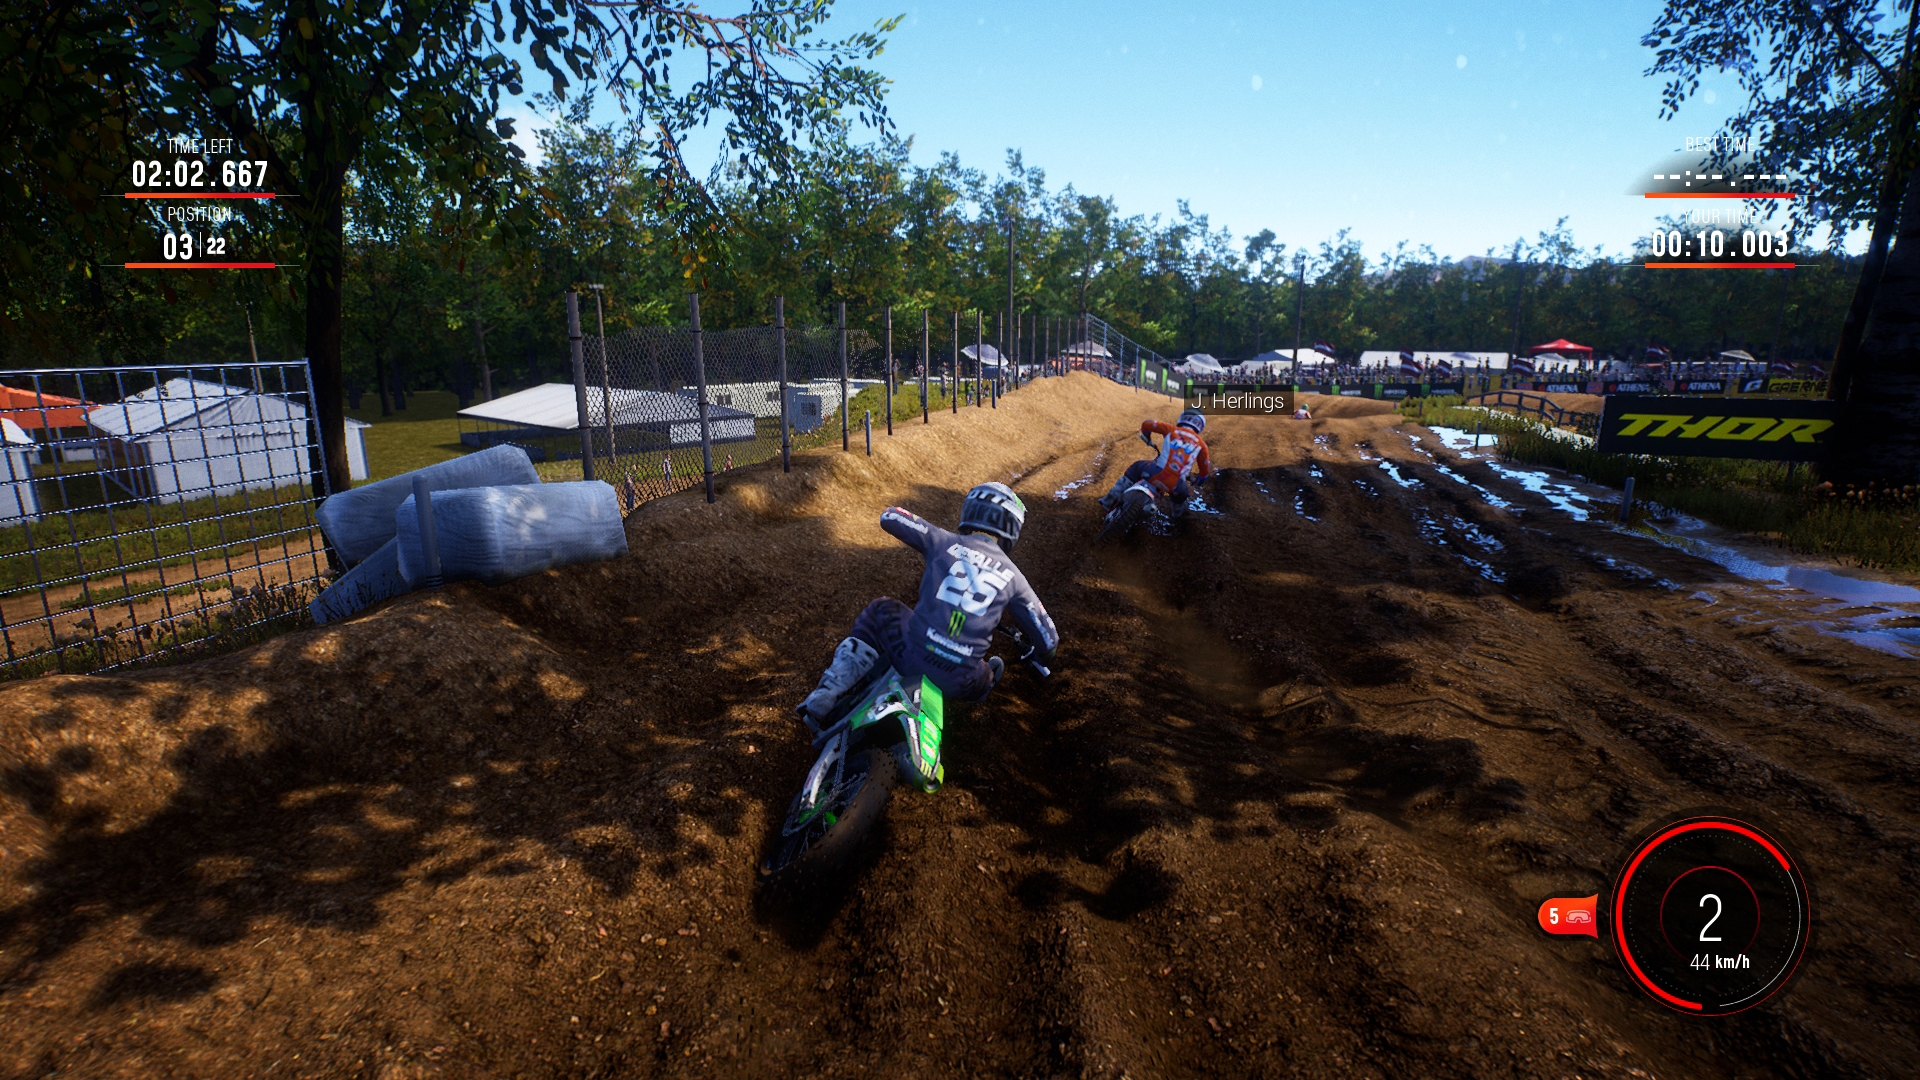 arcade, Automobile, Milestone, MXGP 2019, MXGP 2019 Review, Racing, simulation, Sports, Video Game, Video Game Review, Xbox One, Xbox One Review